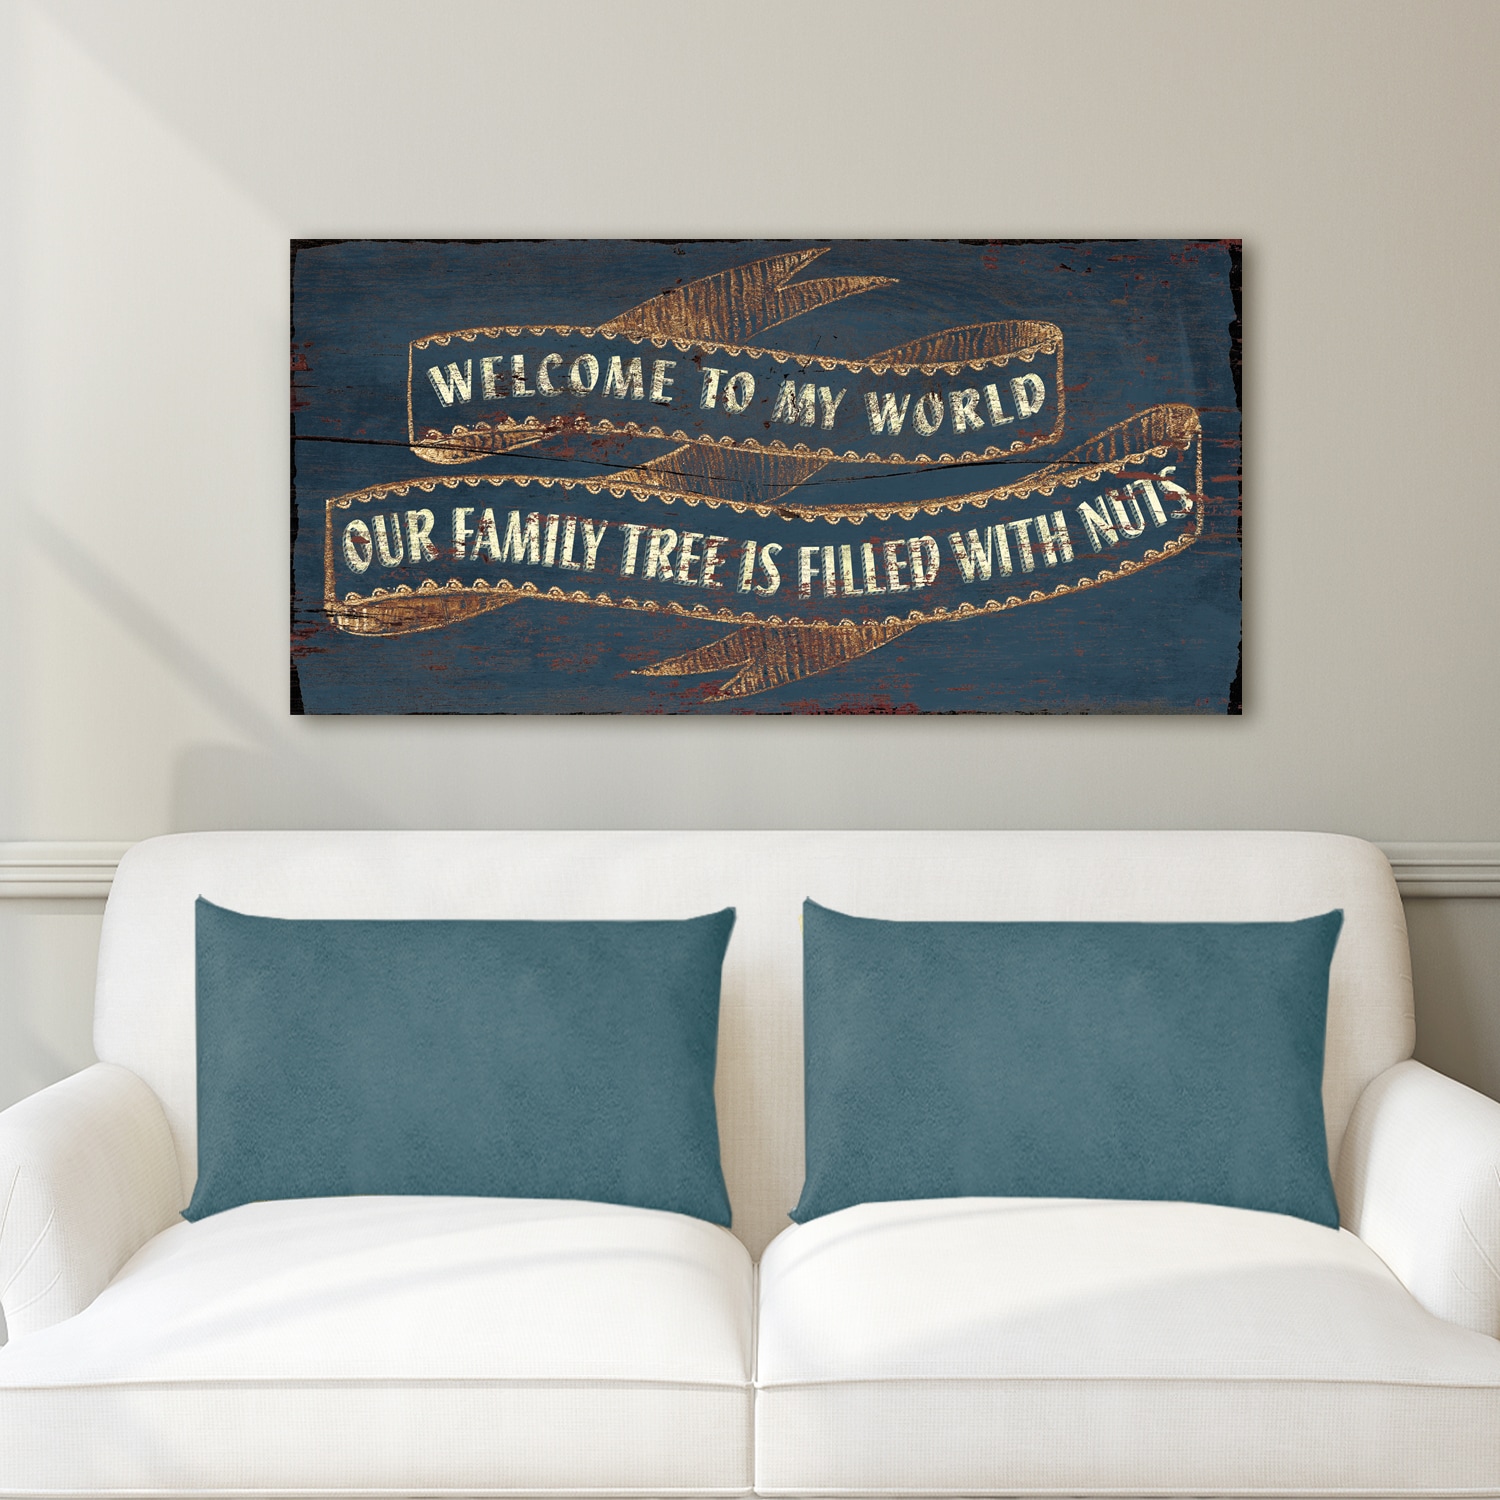 Shop Portfolio Canvas Decor Ihd Studio Welcome To My World 3 Vintage Sign Portfolio Stretched And Wrapped Canvas Wall Art Overstock 12915037